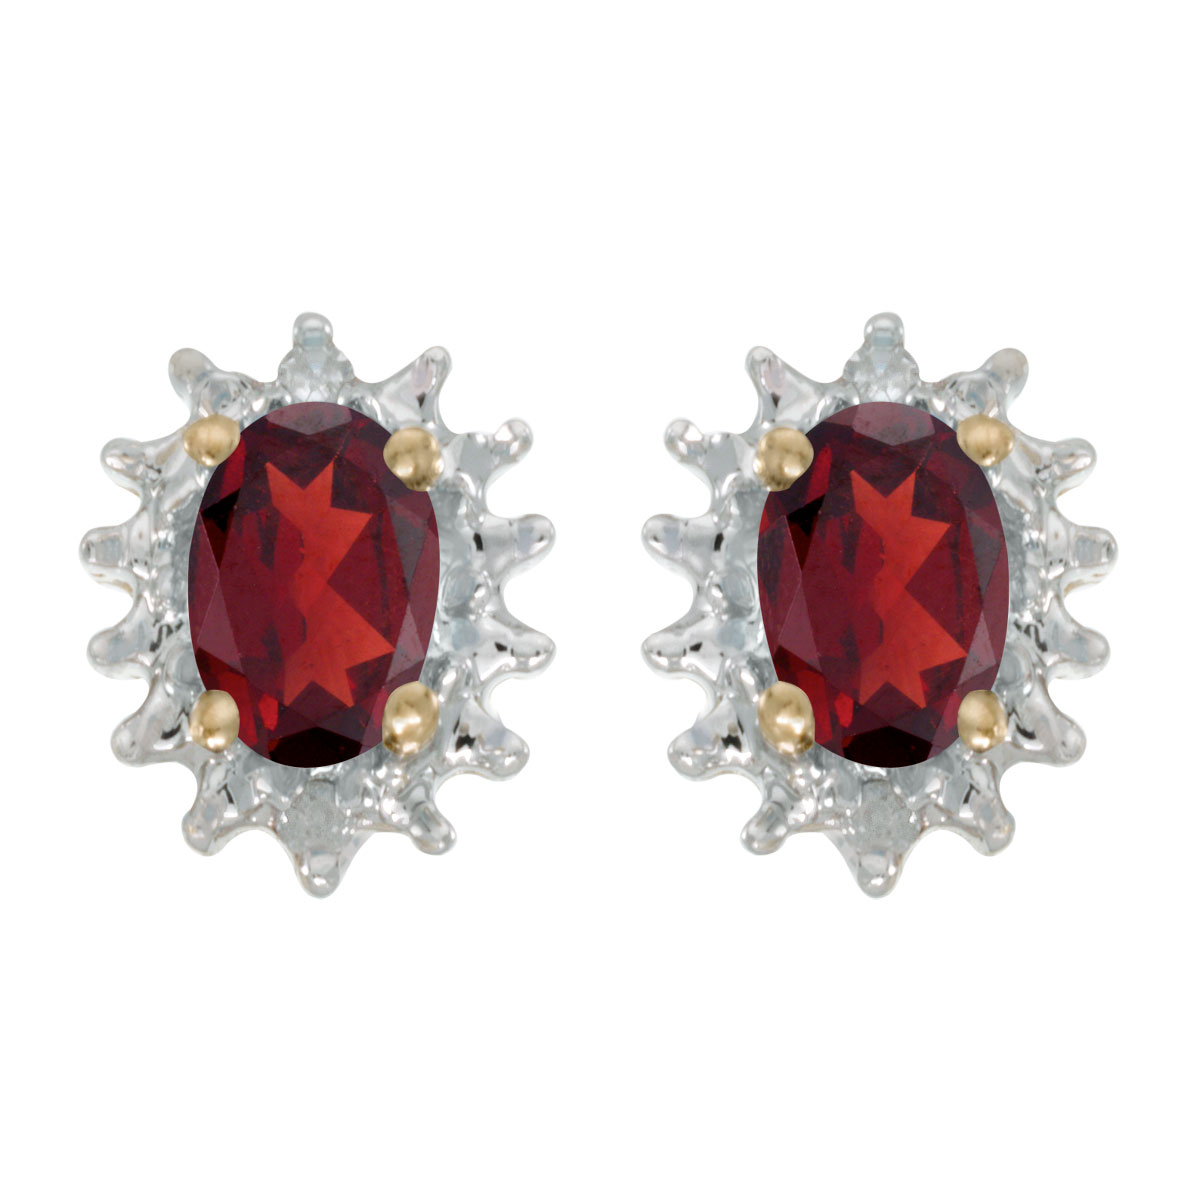 These 14k yellow gold oval garnet and diamond earrings feature 6x4 mm genuine natural garnets wit...